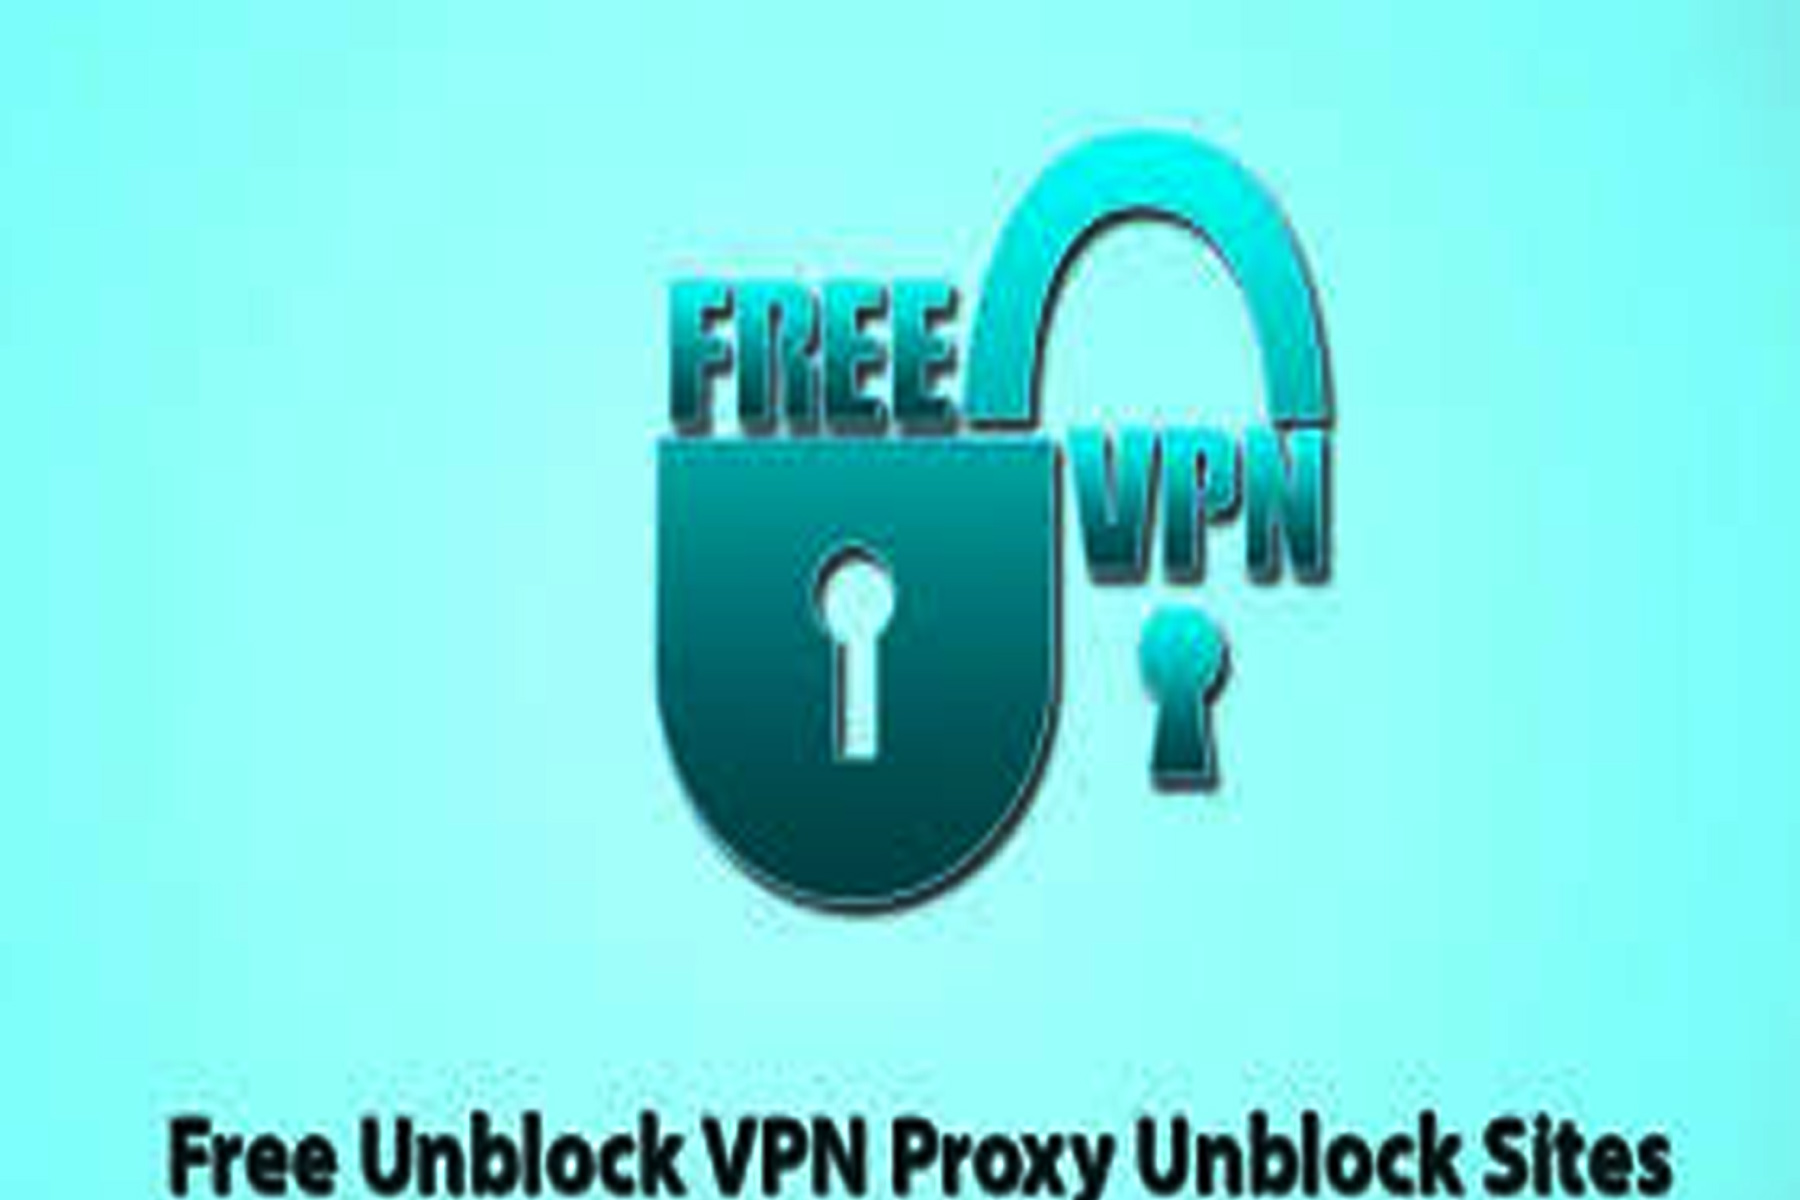 download vpn proxy master for pc